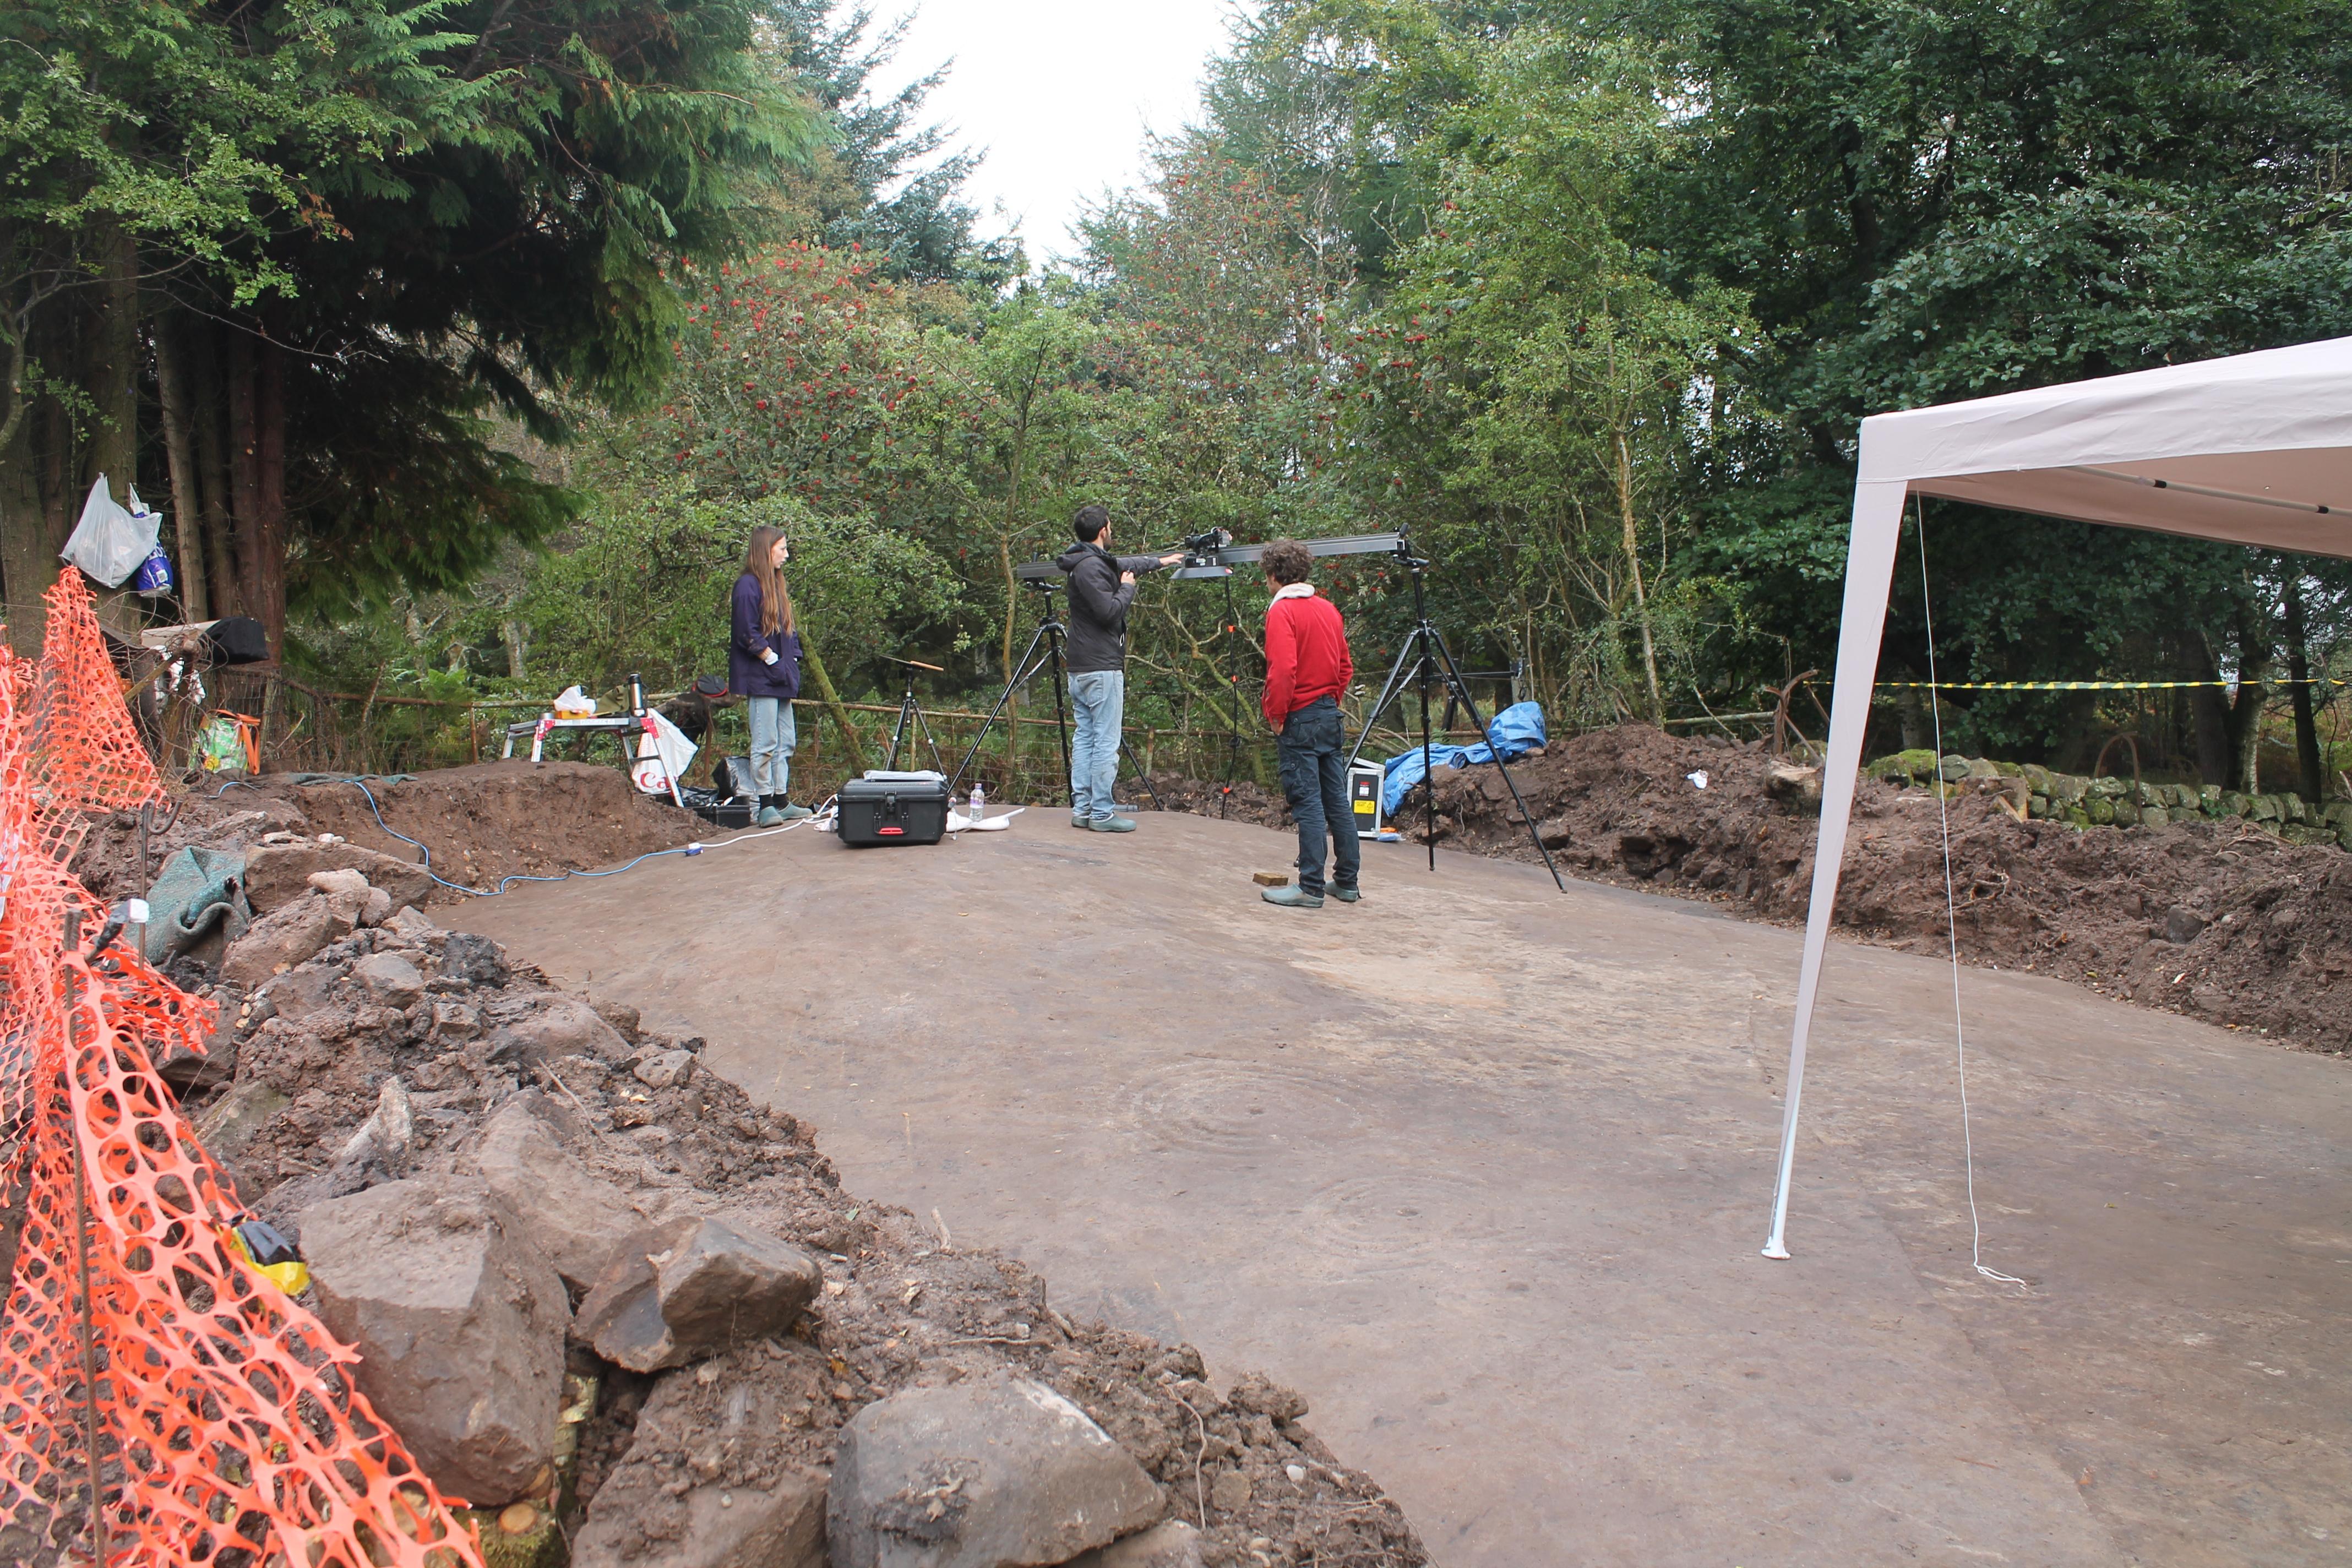 Team of Archeoligists digging for rock art in Faifley